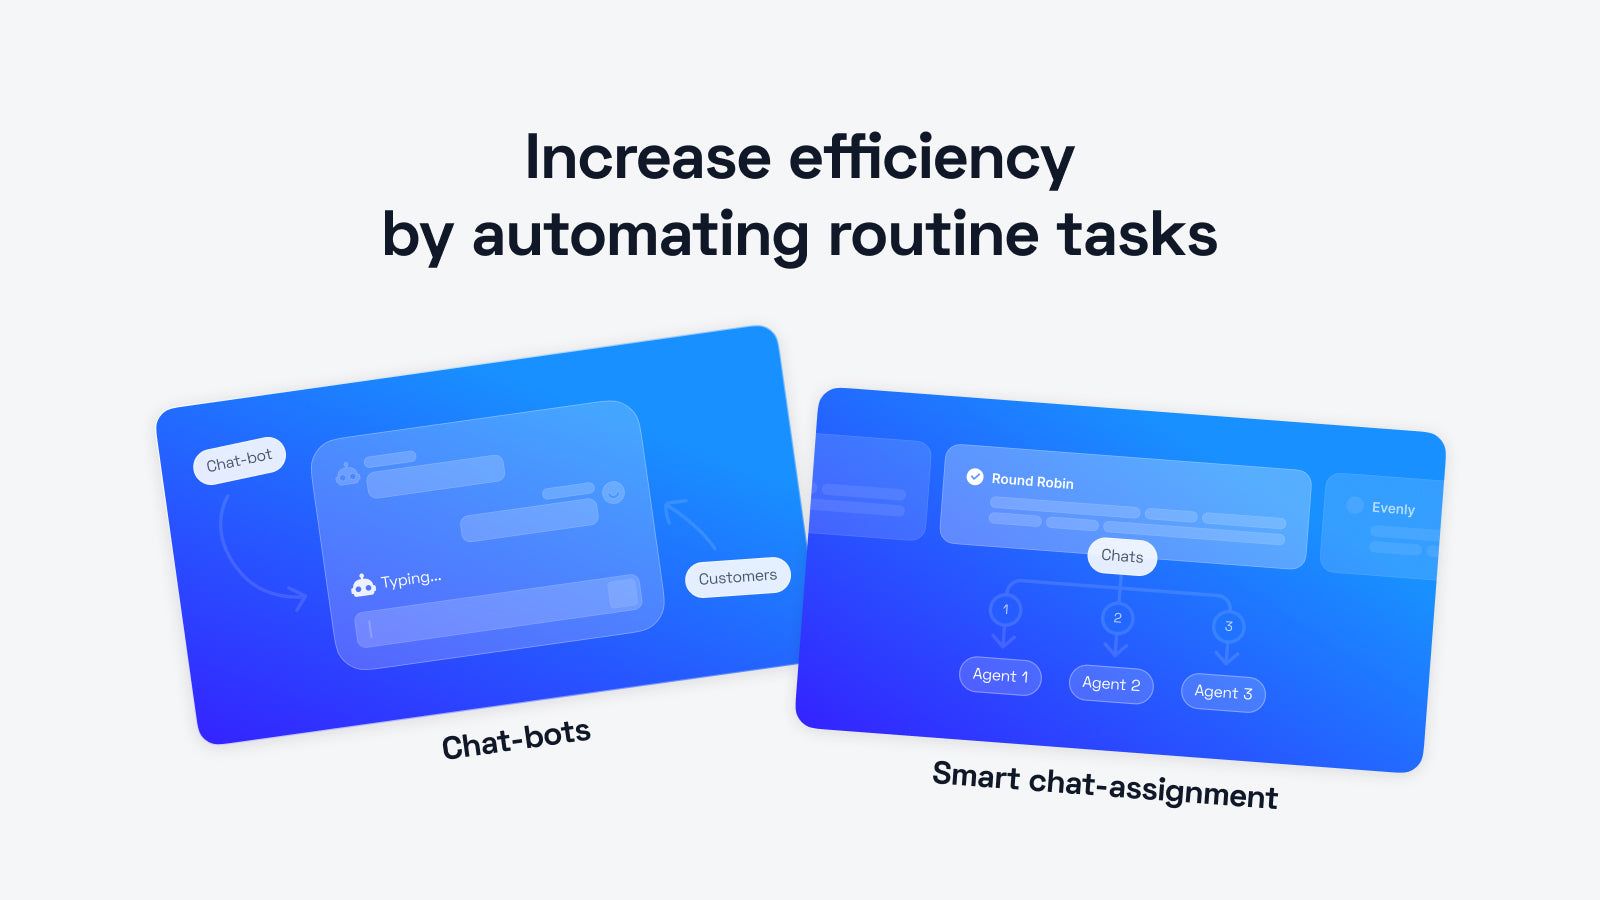 Increase efficiency by automating routine tasks